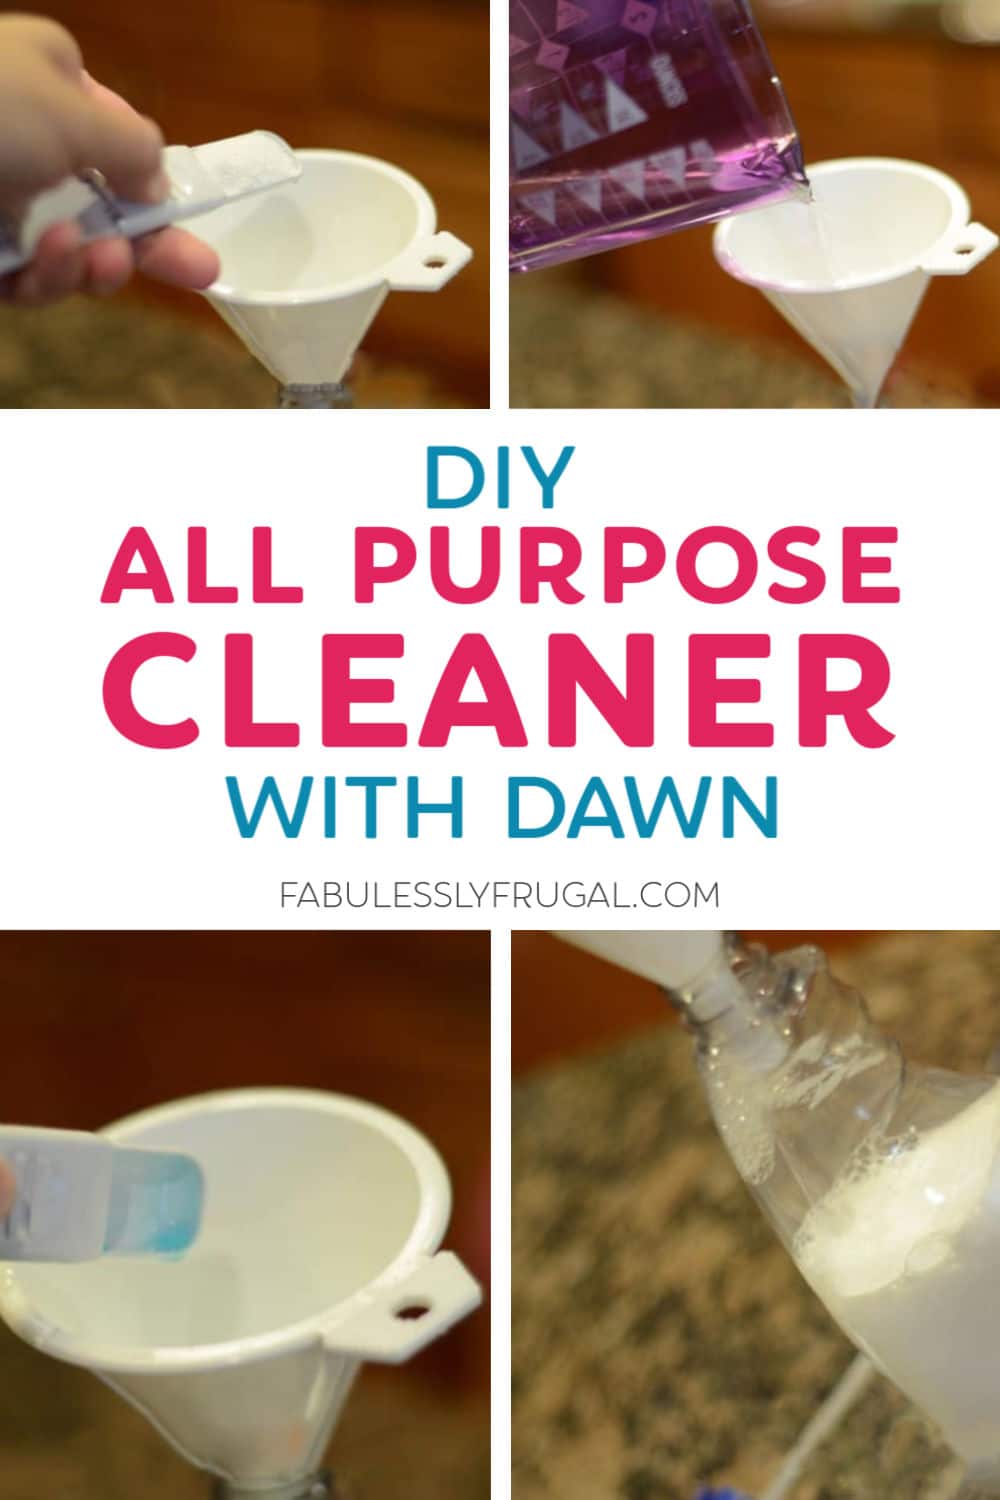 DIY all purpose cleaner with dawn